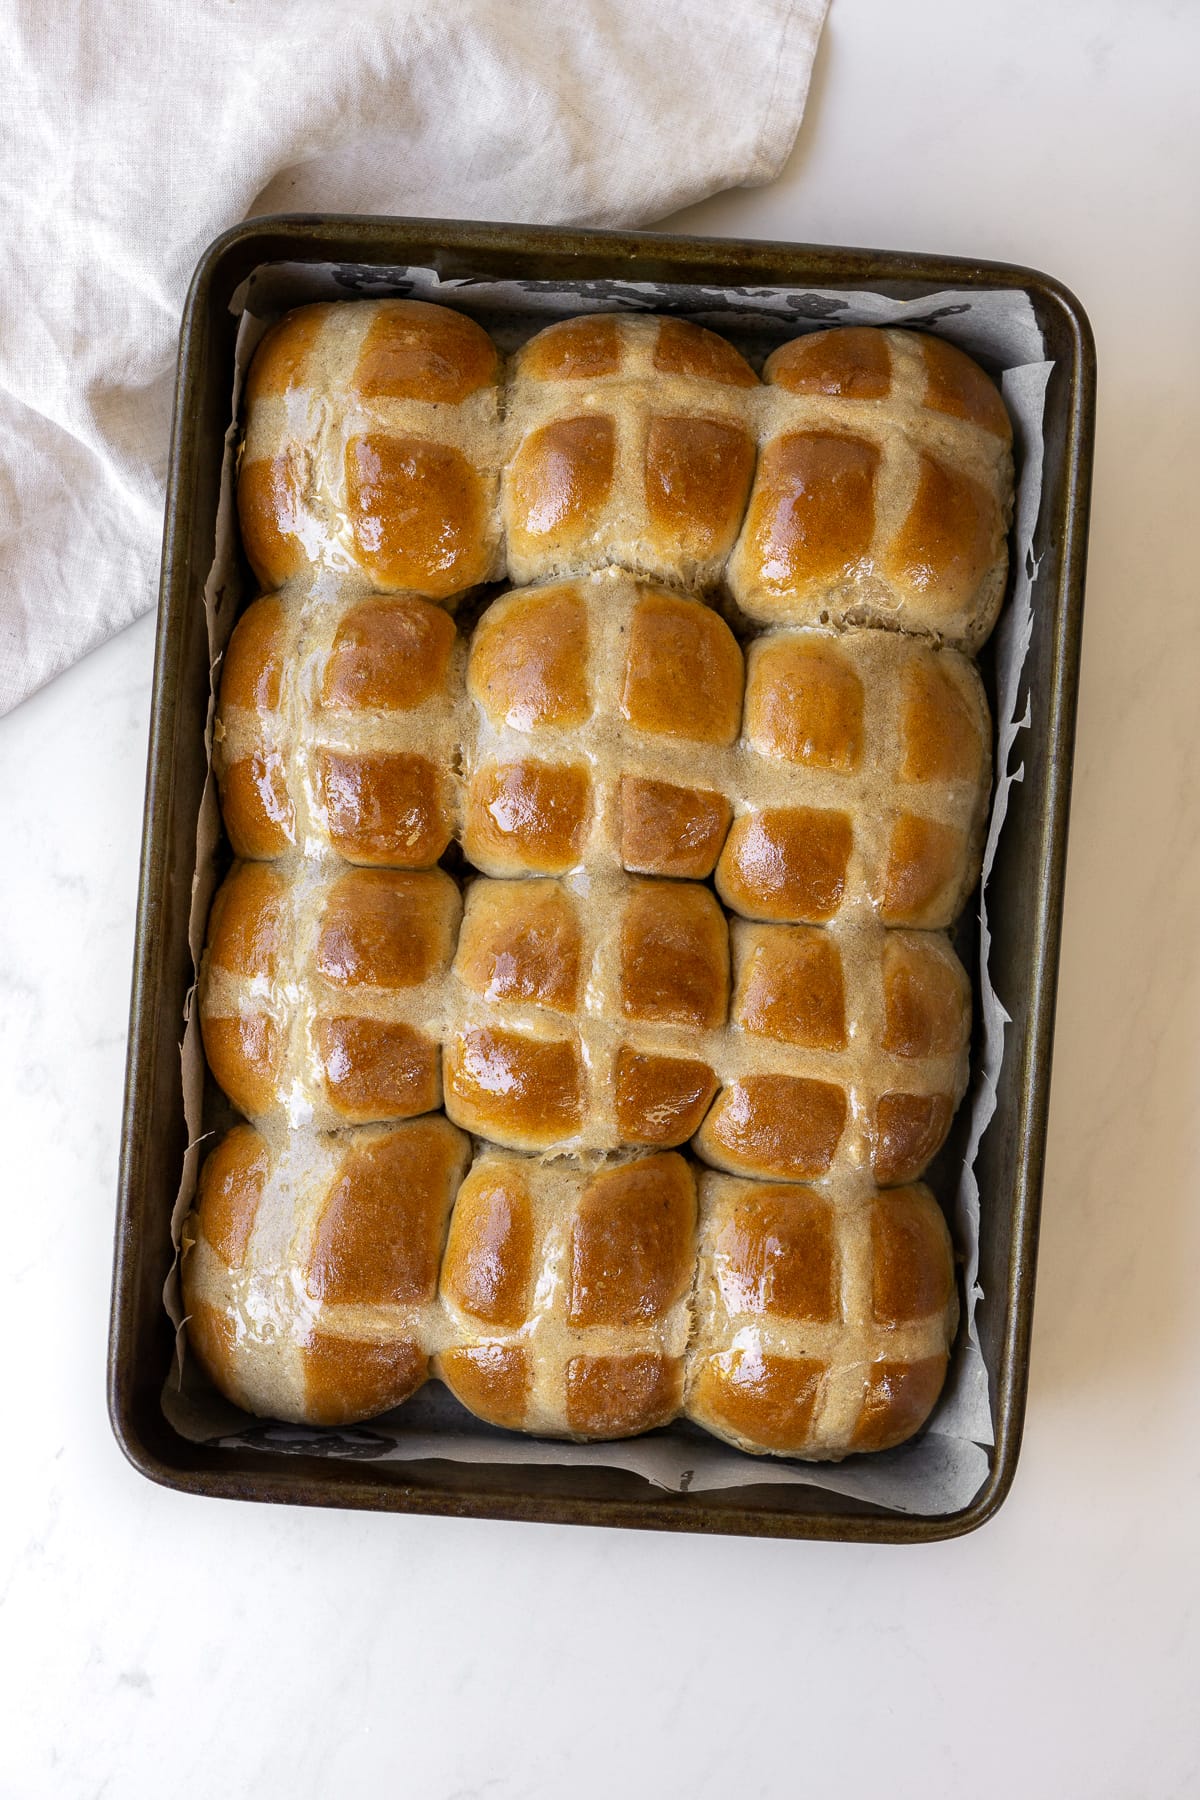 Fresh baked hot crossed buns in a baking tray.